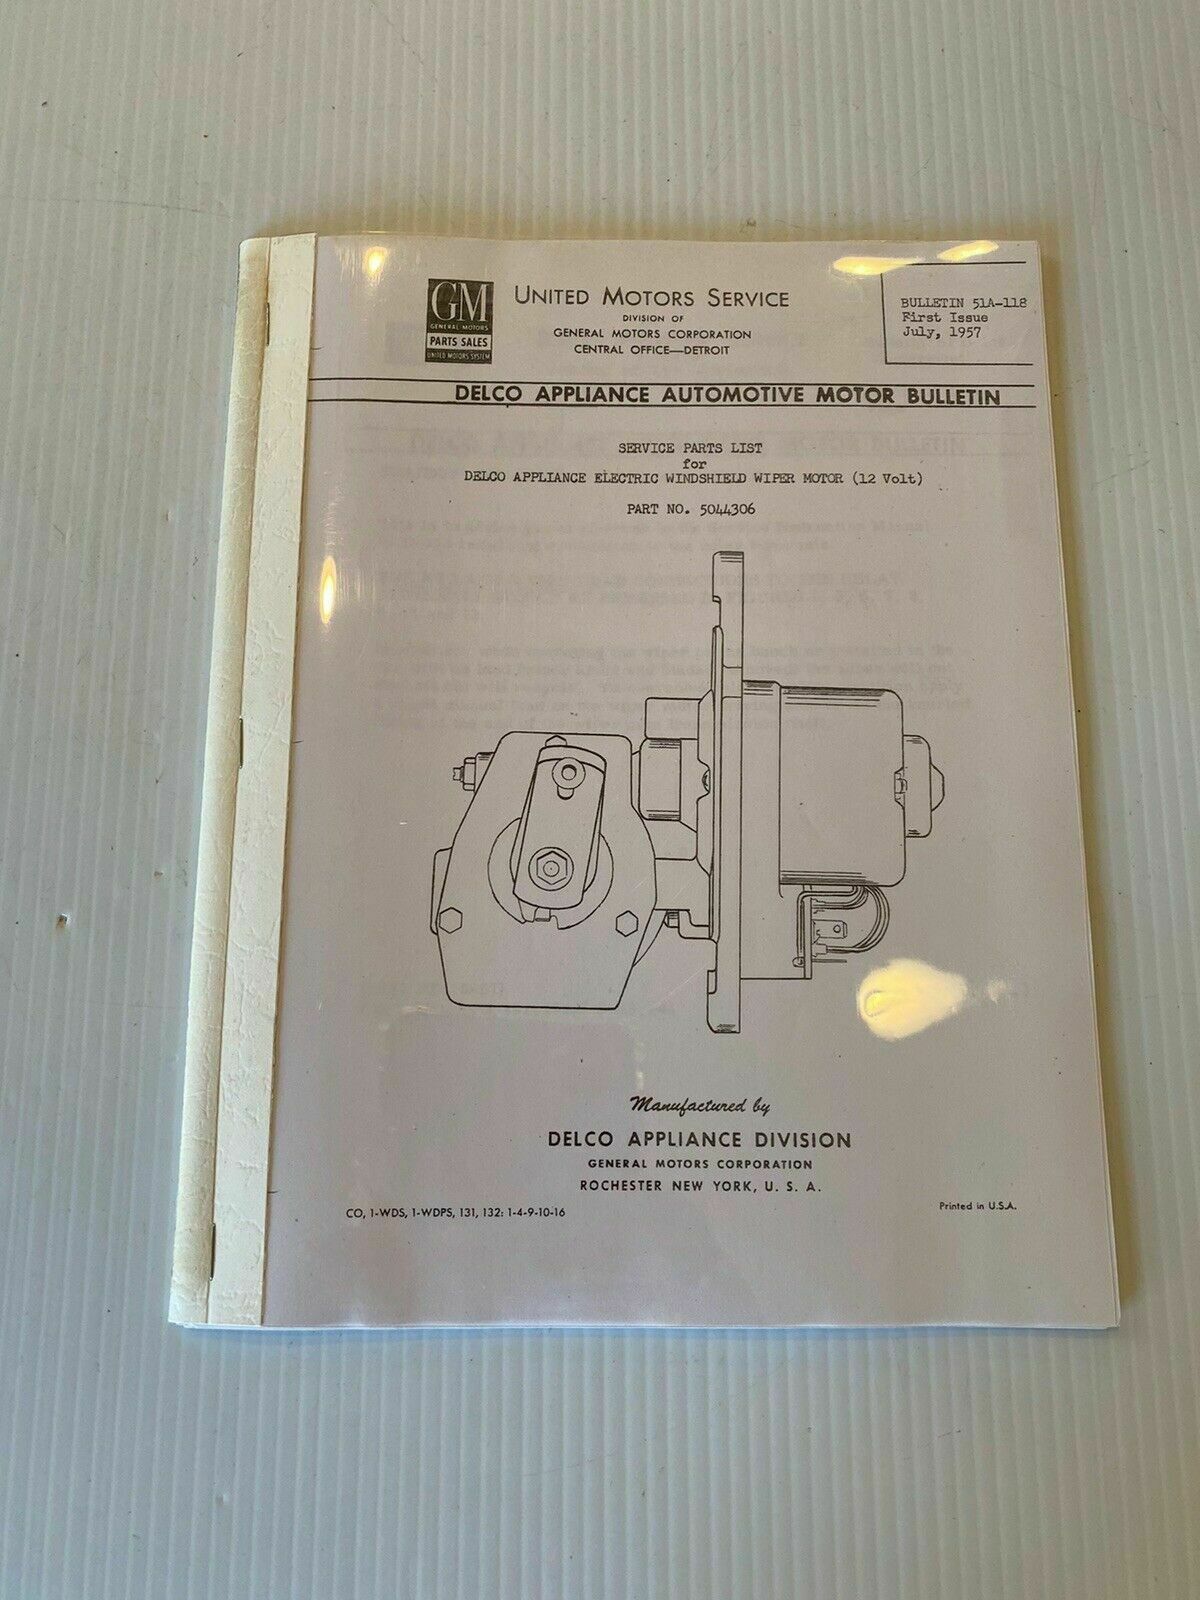 Manuals: 1958 Car 1958 -1959 Truck Chevy Electric Windshield Wiper Motor Service Book 27 Page